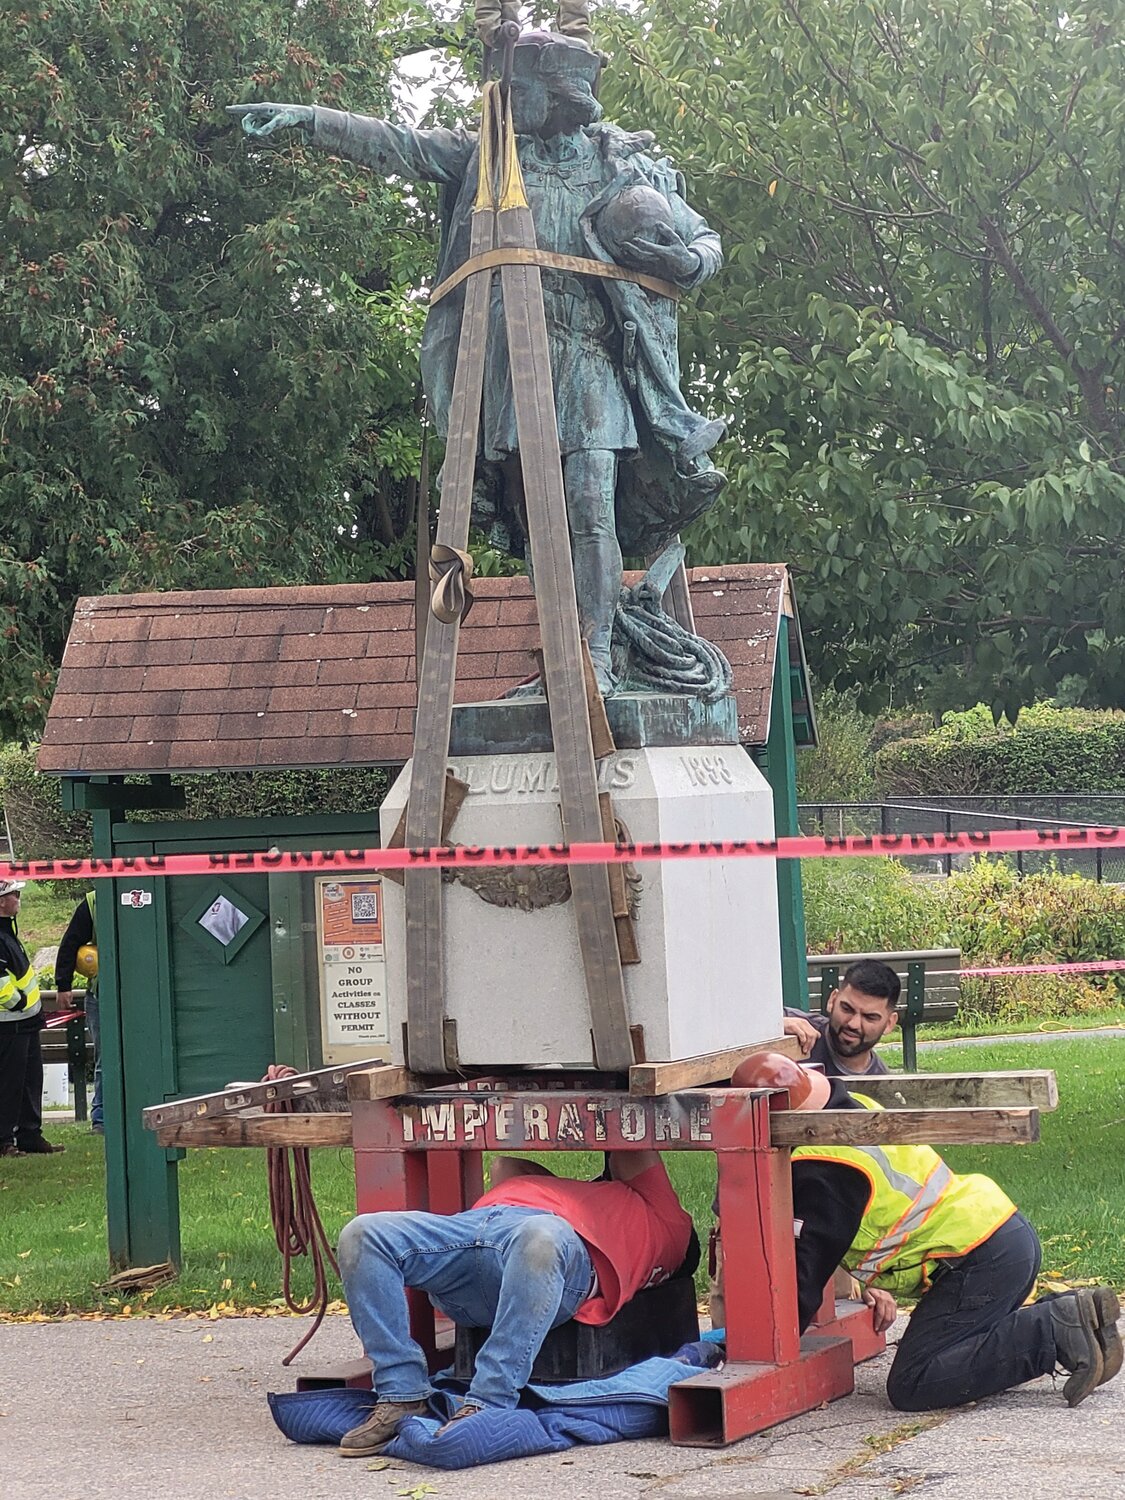 COLUMBUS BY CRANE: The Christopher Columbus statue that stood in Providence for 130 years has been erected on a cement pedestal on the island in the center of Johnston’s War Memorial Park pond. The mayor has planned a Columbus Day unveiling event.